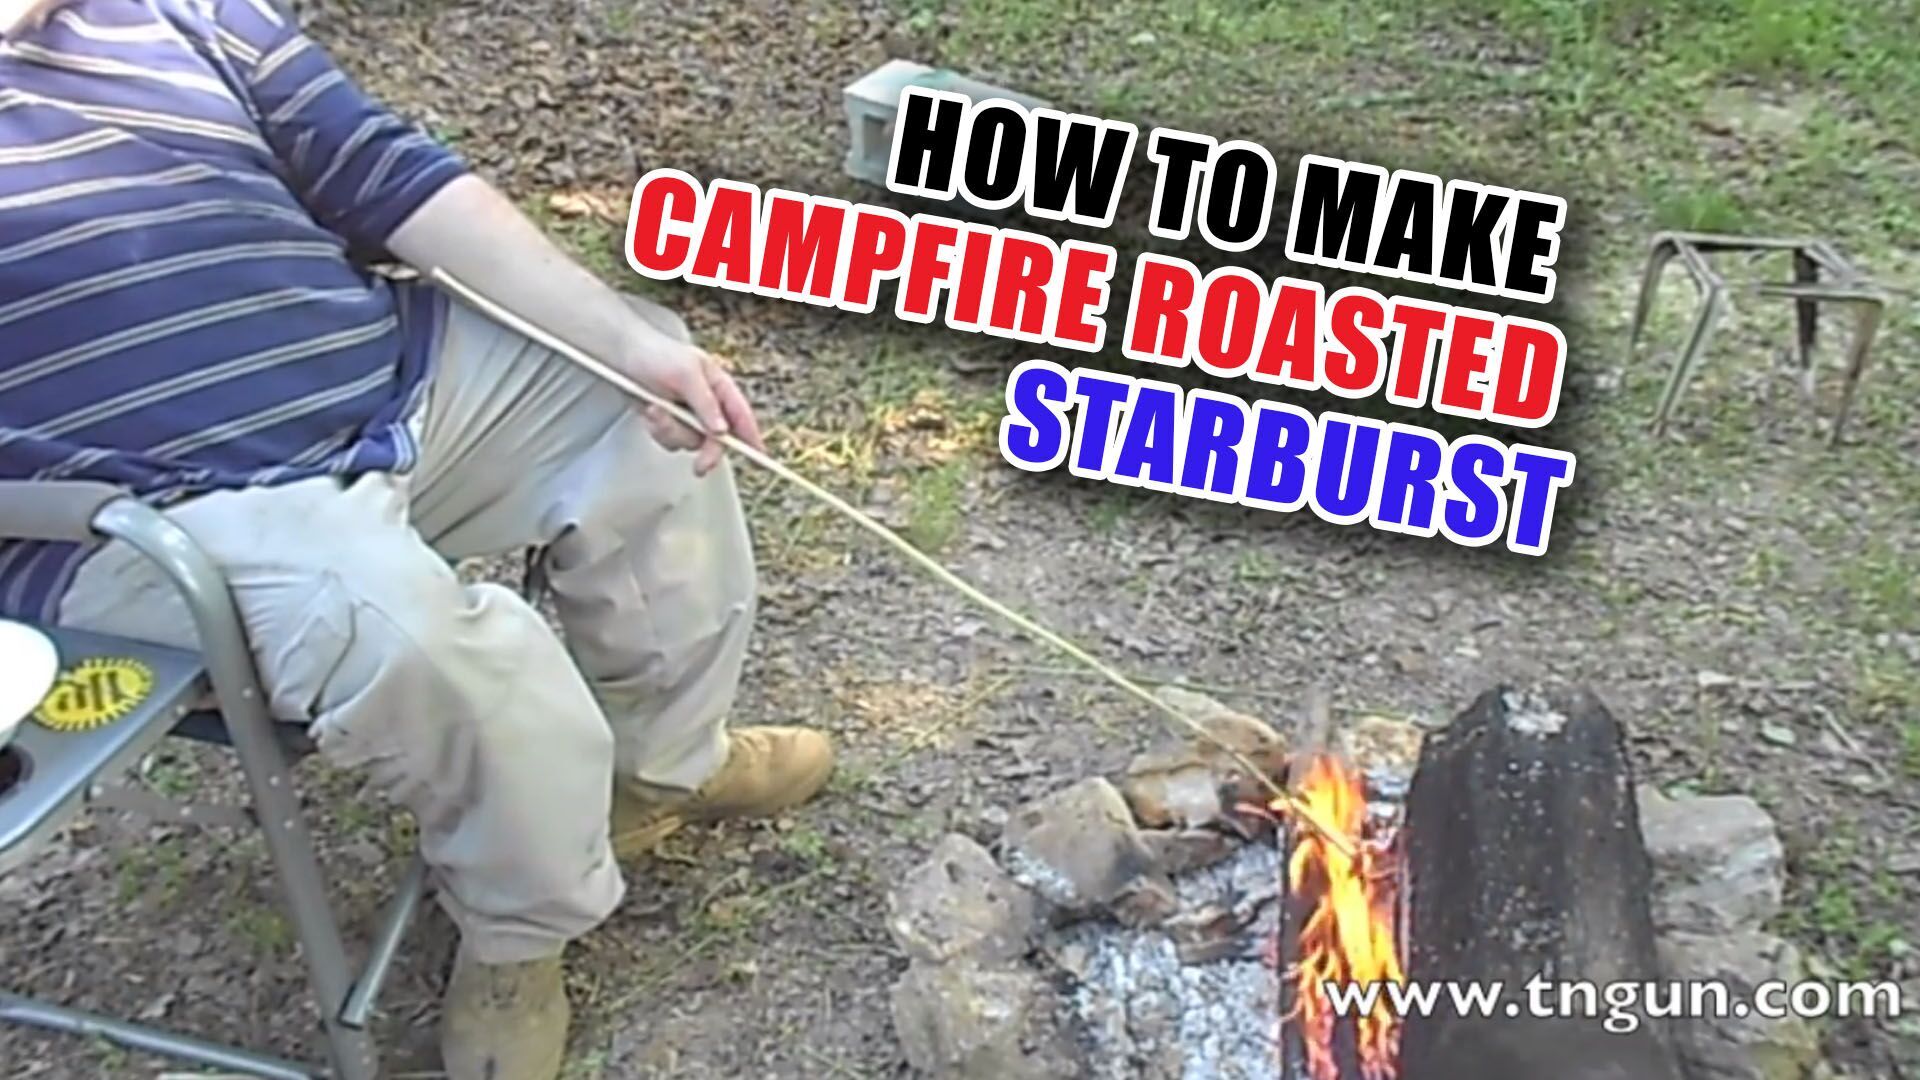 How to Make Campfire Roasted Starburst